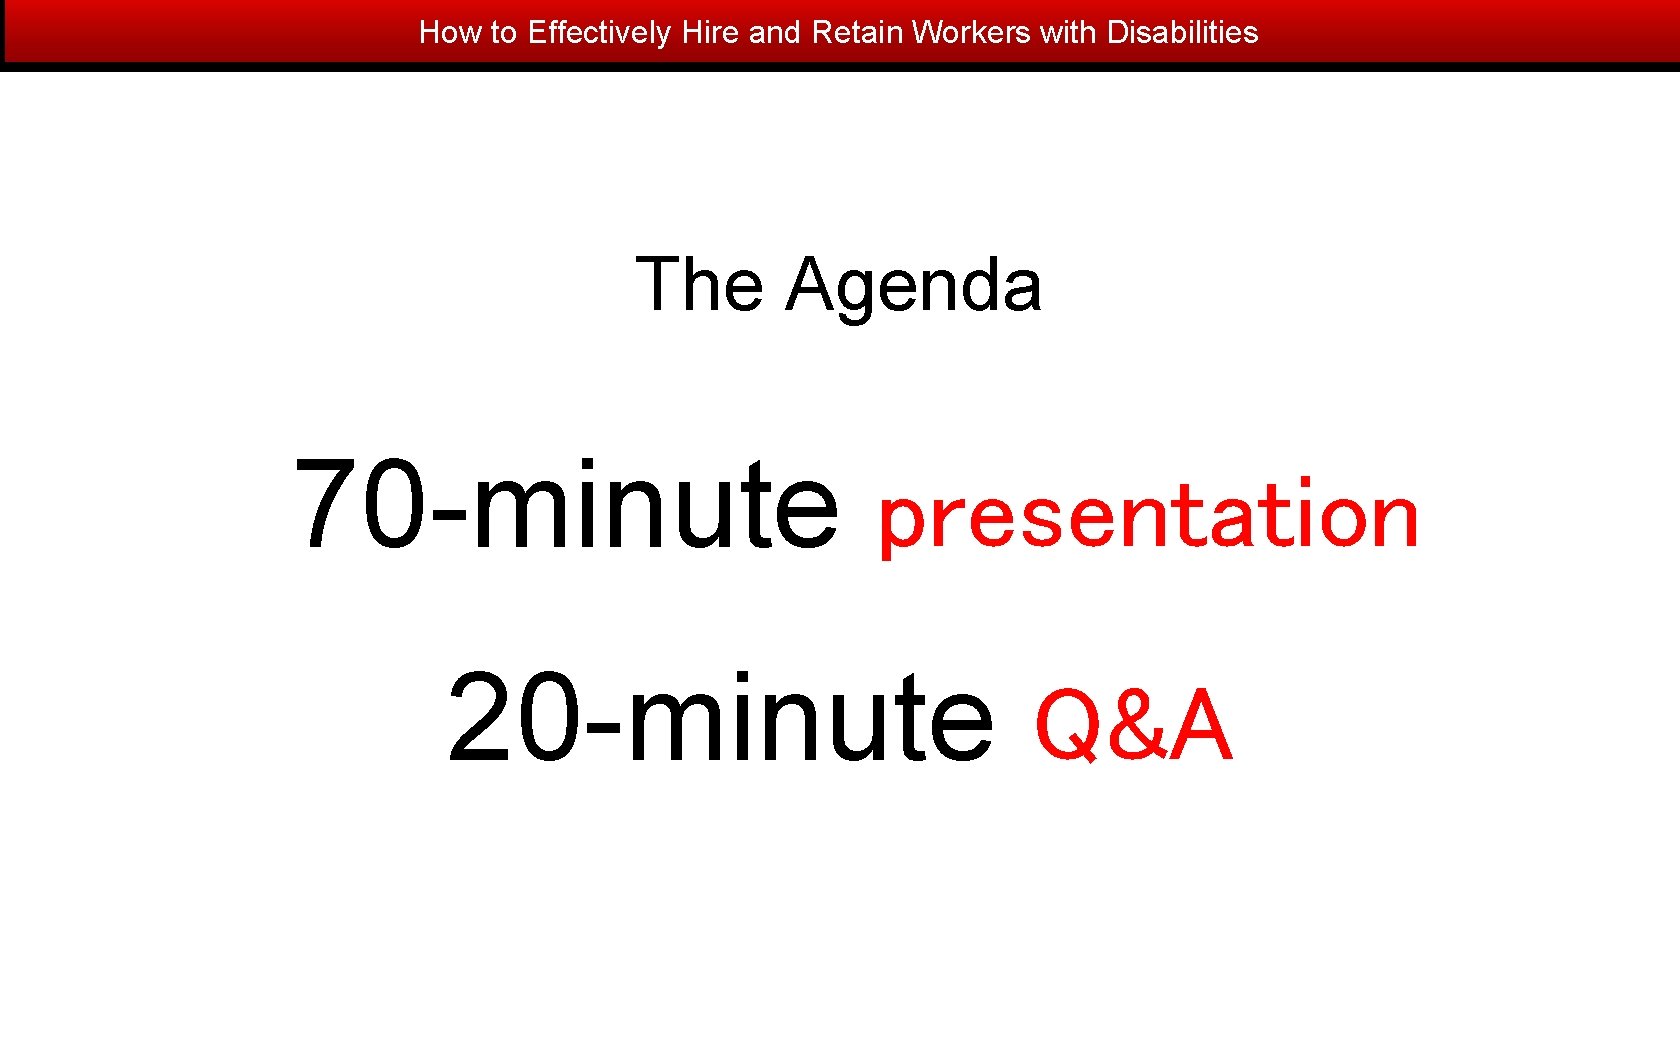 How to Effectively Hire and Retain Workers with Disabilities The Agenda 70 -minute presentation